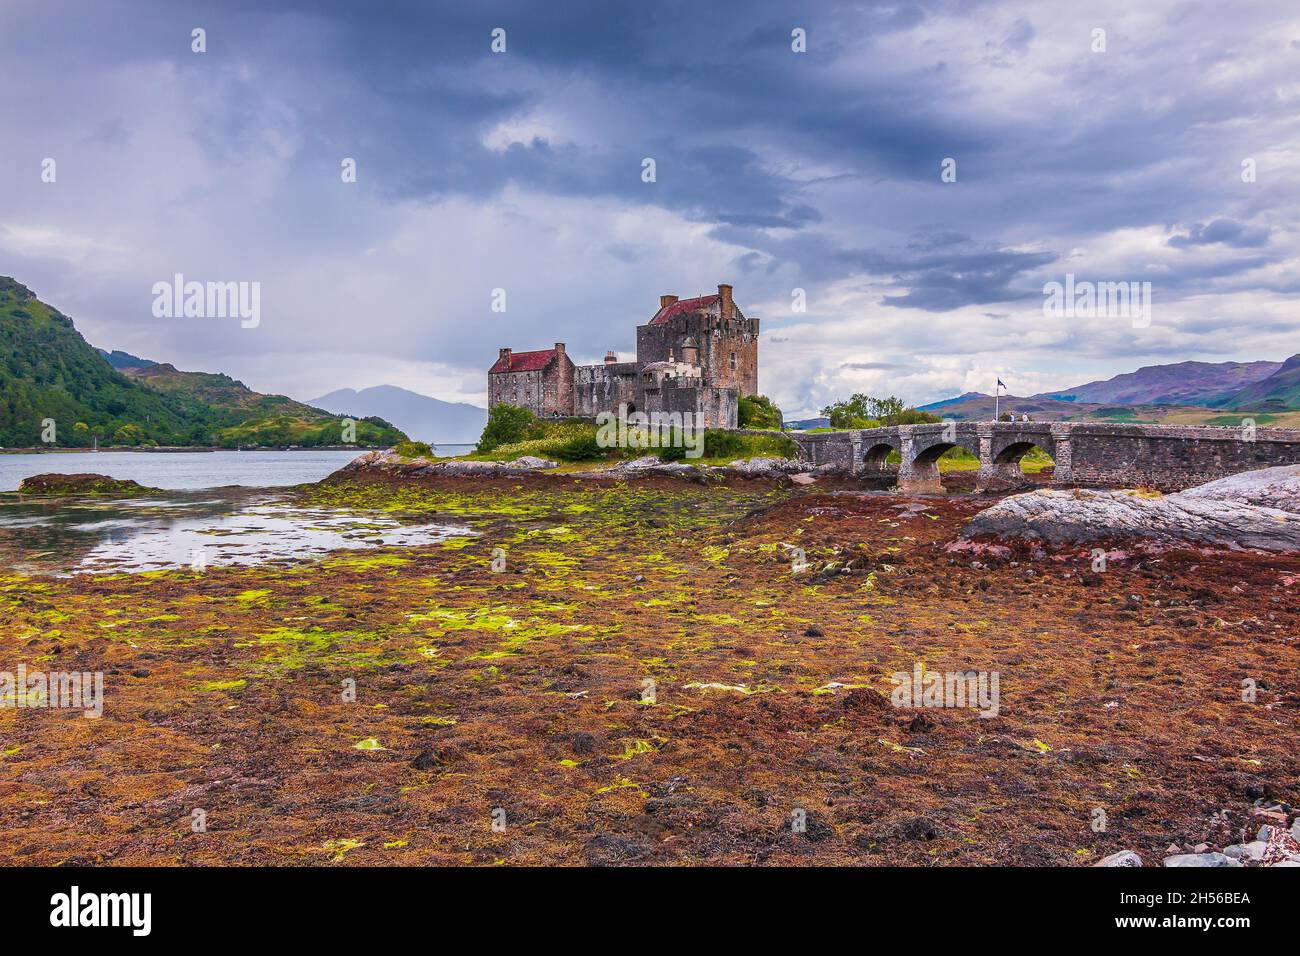 Lake Loch Duich at low tide. Eilean Donan Castle in summer on the island. Castle and a stone bridge and small archways. Algae on stones in the foregro Stock Photo